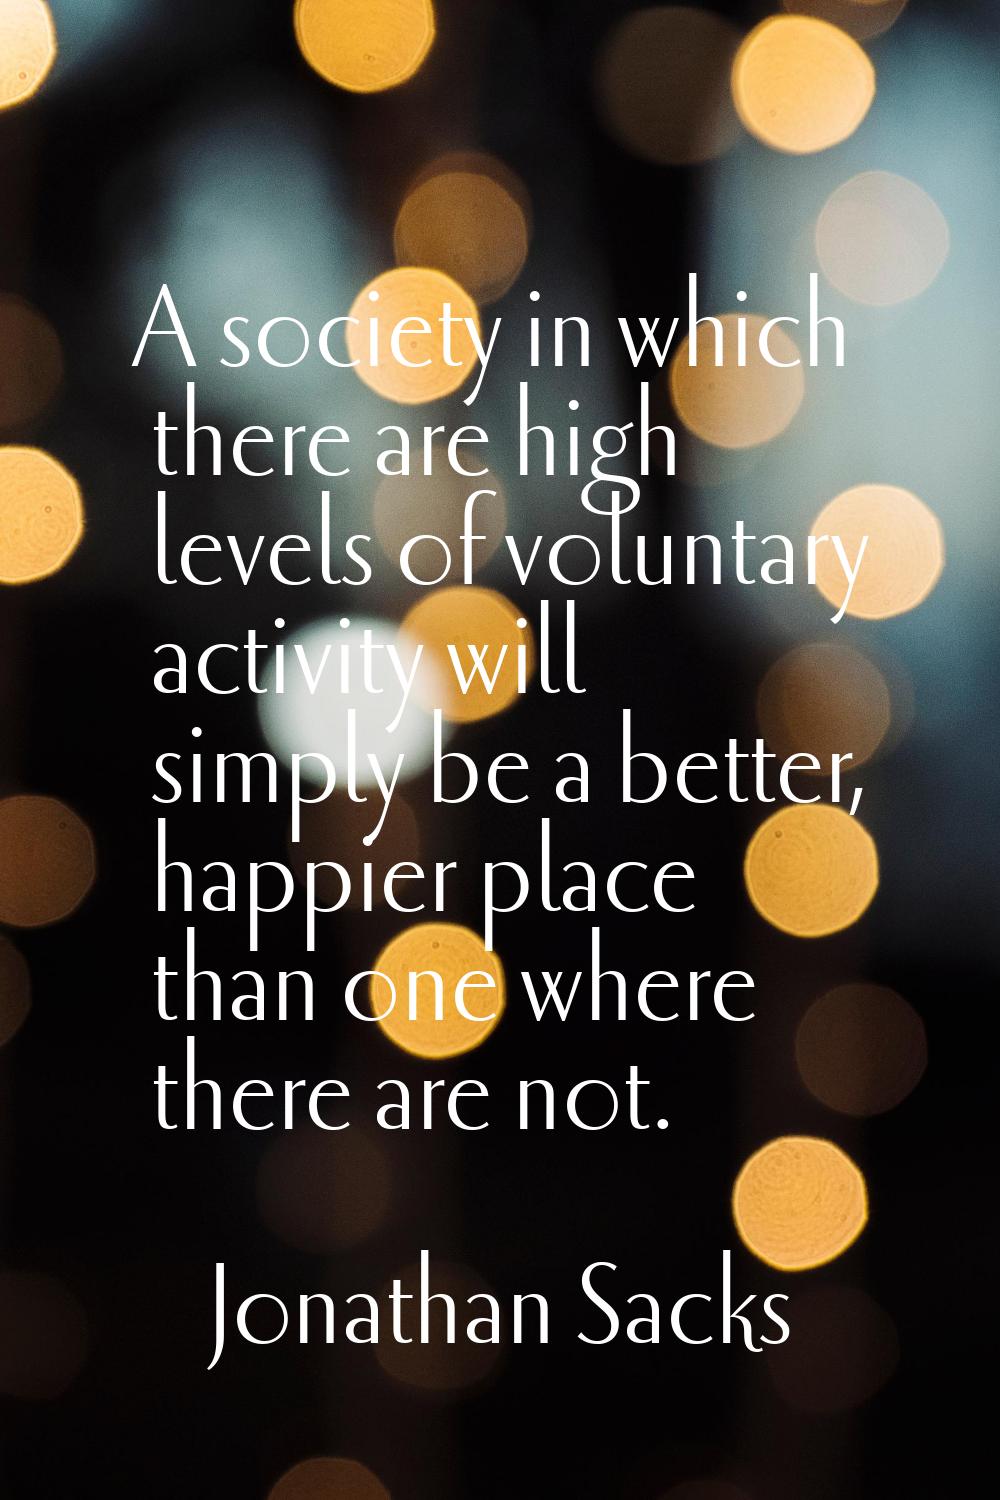 A society in which there are high levels of voluntary activity will simply be a better, happier pla